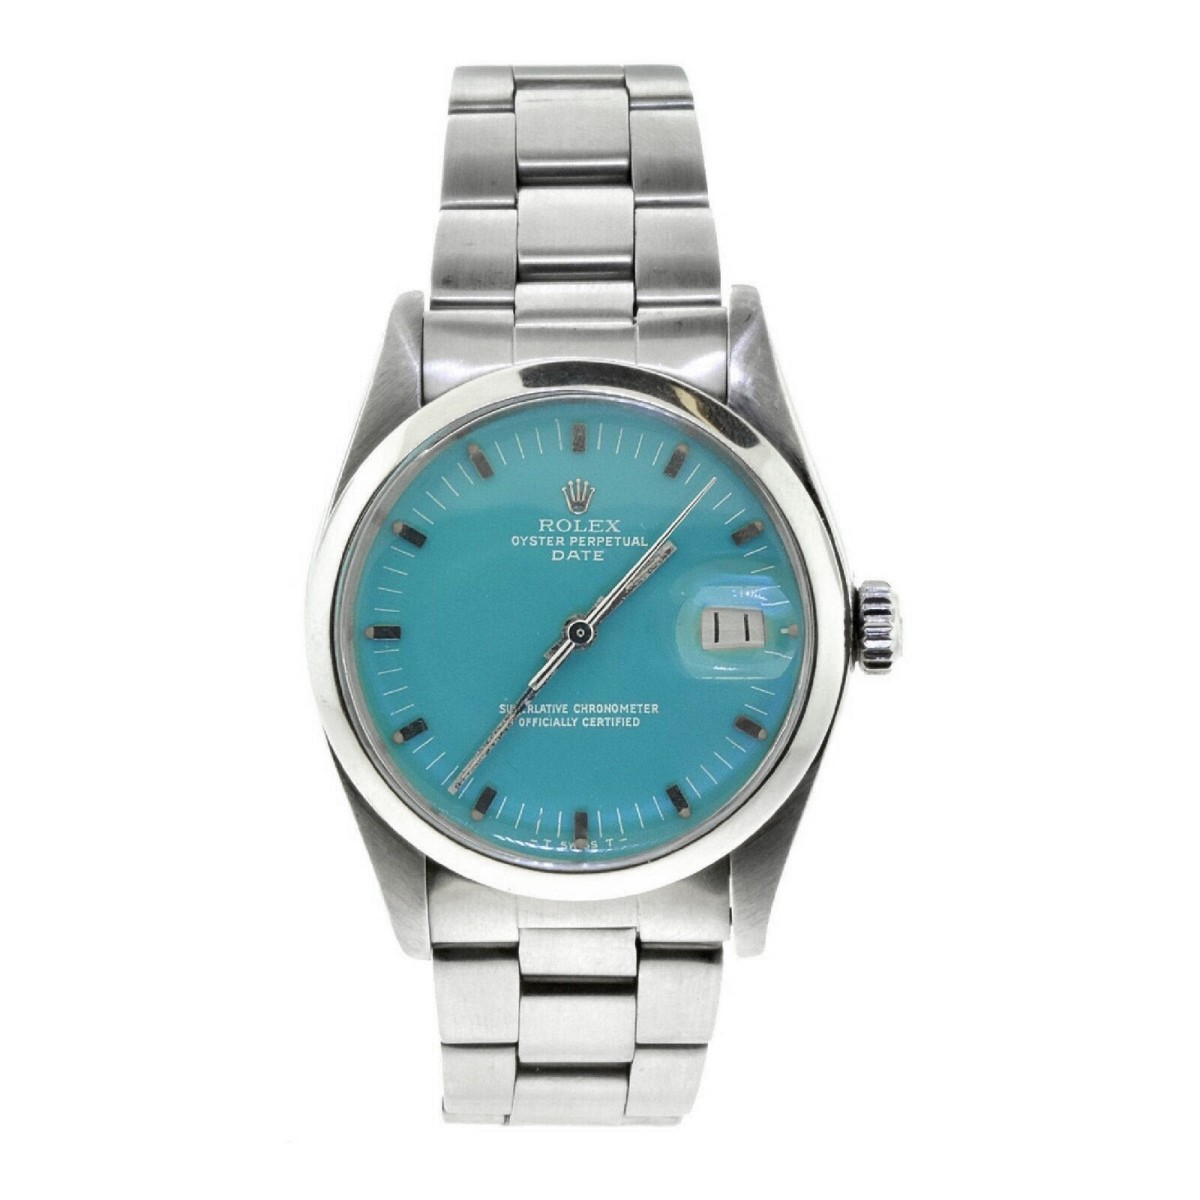 Rolex Date Ref. 1500 Turquoise Dial